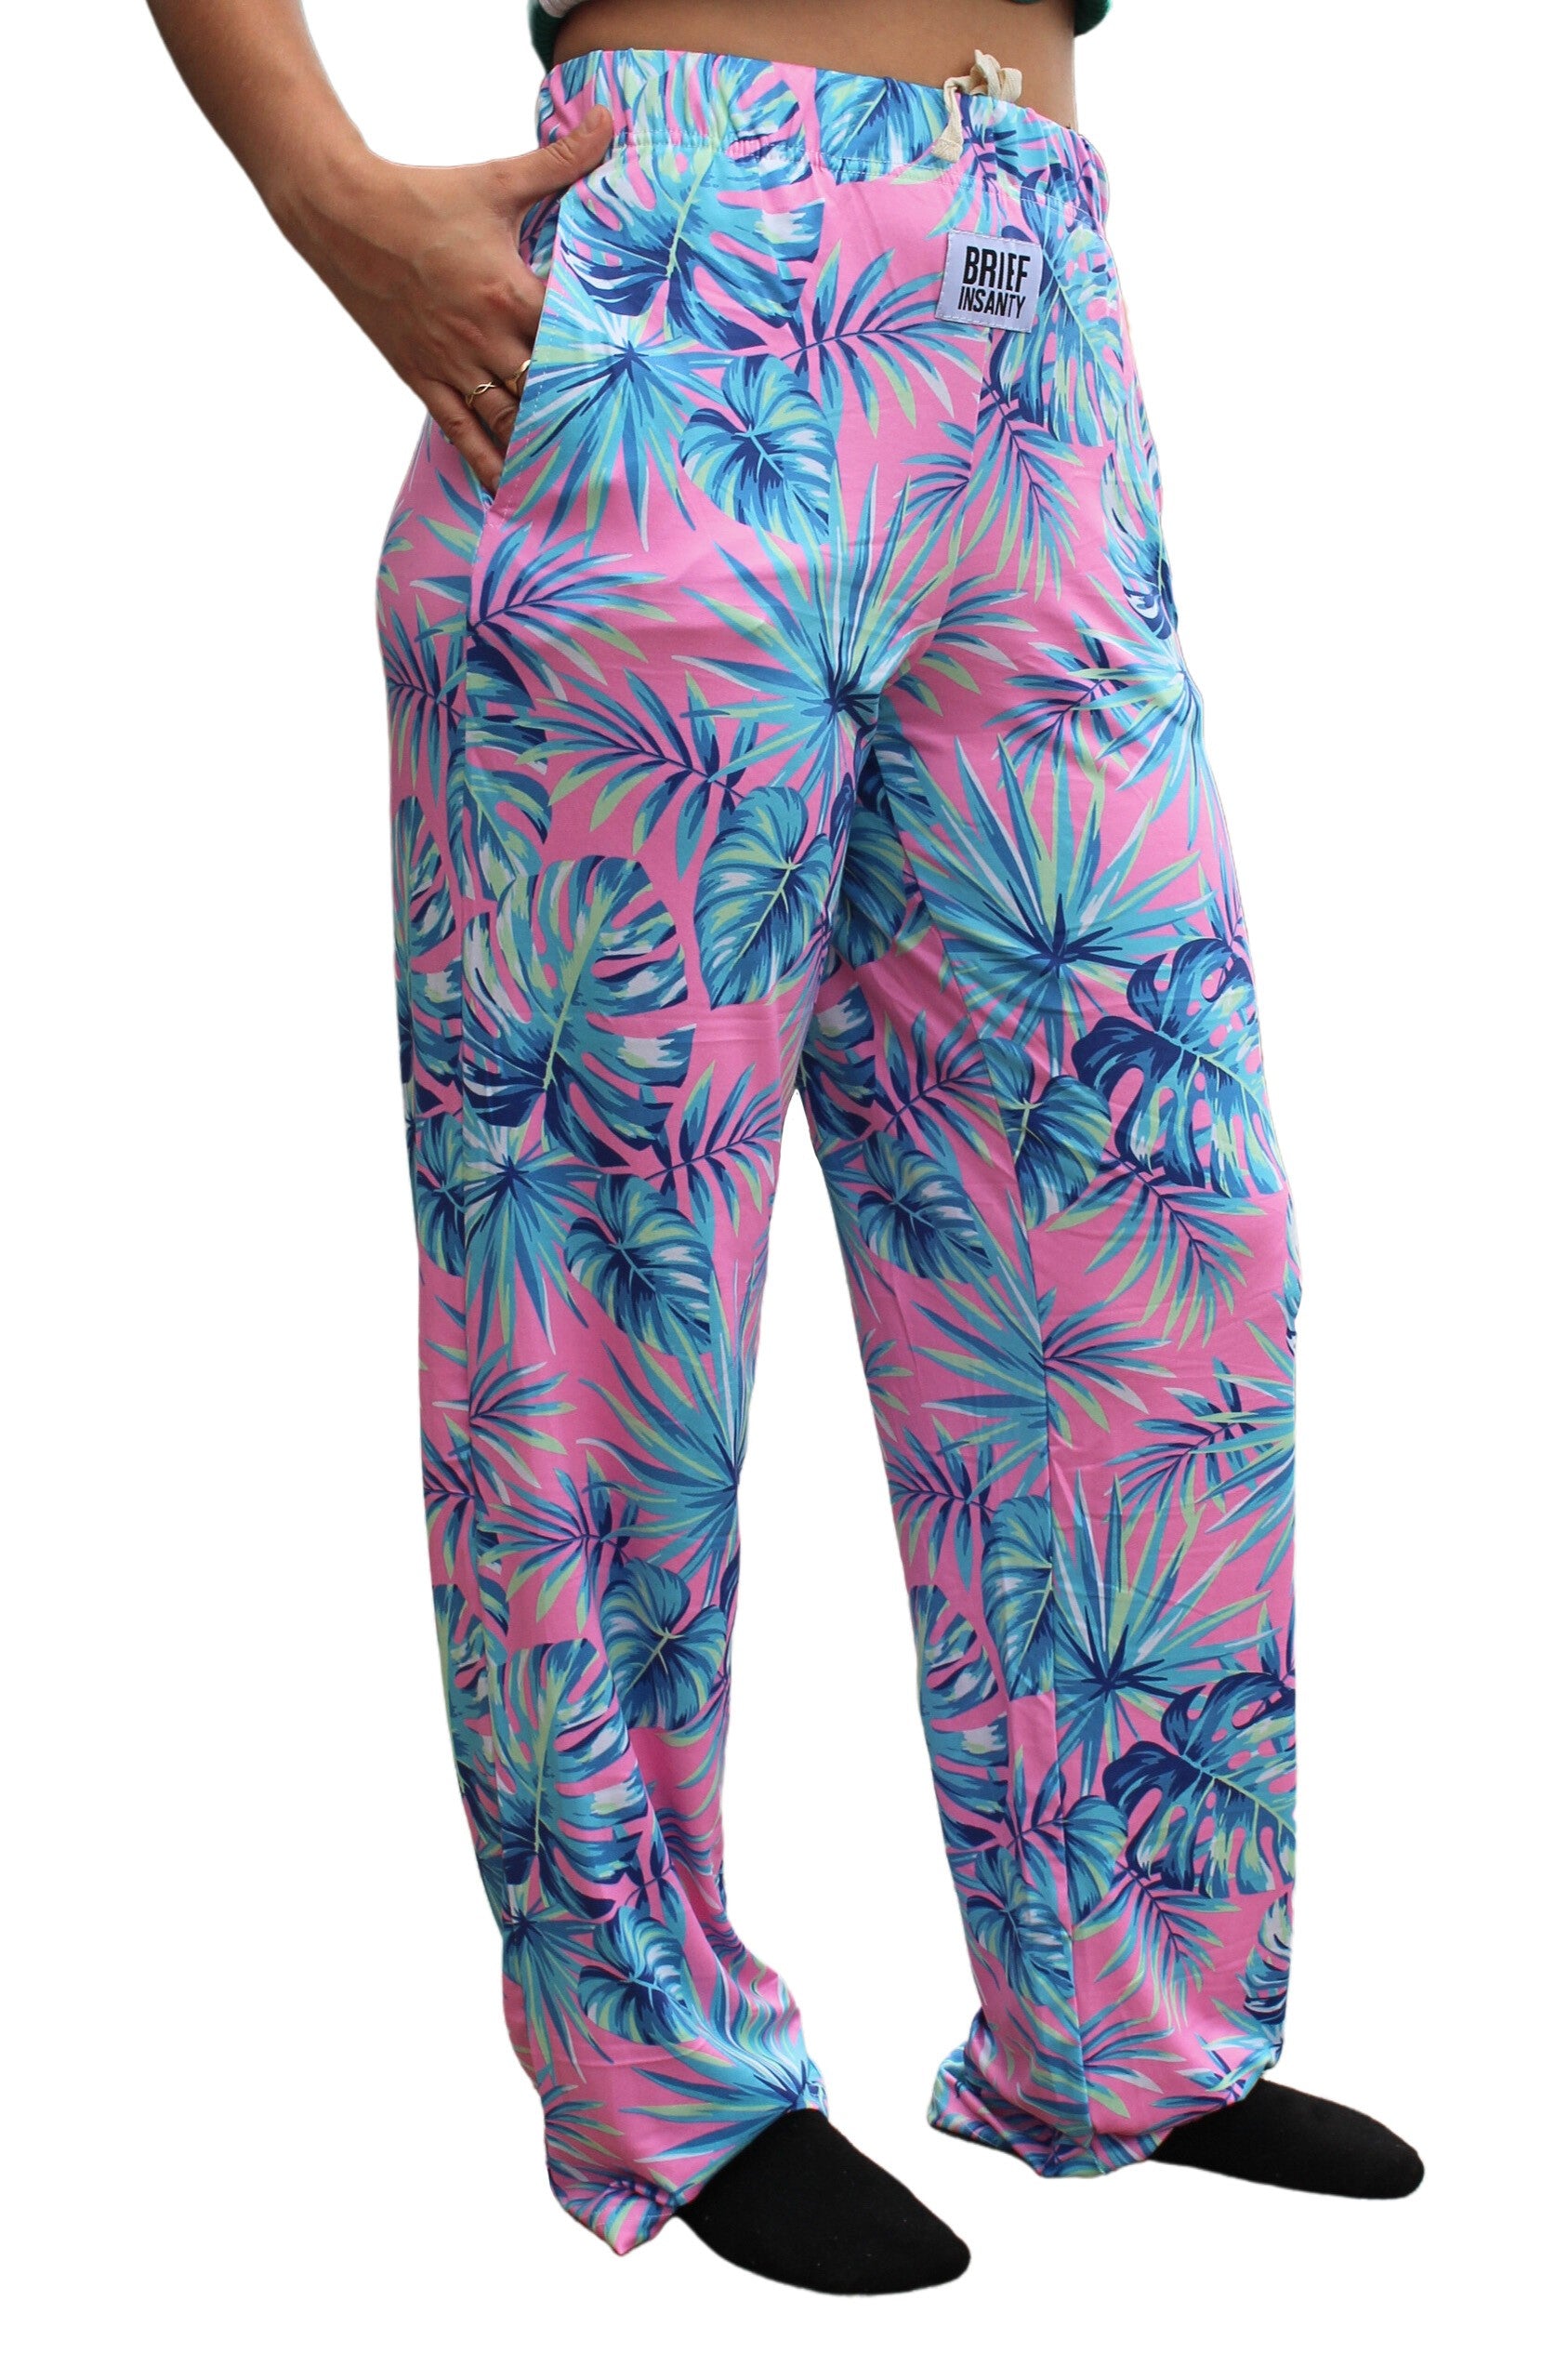 Tropical Leaf Pajama Lounge Pants right side view on model (waist down)